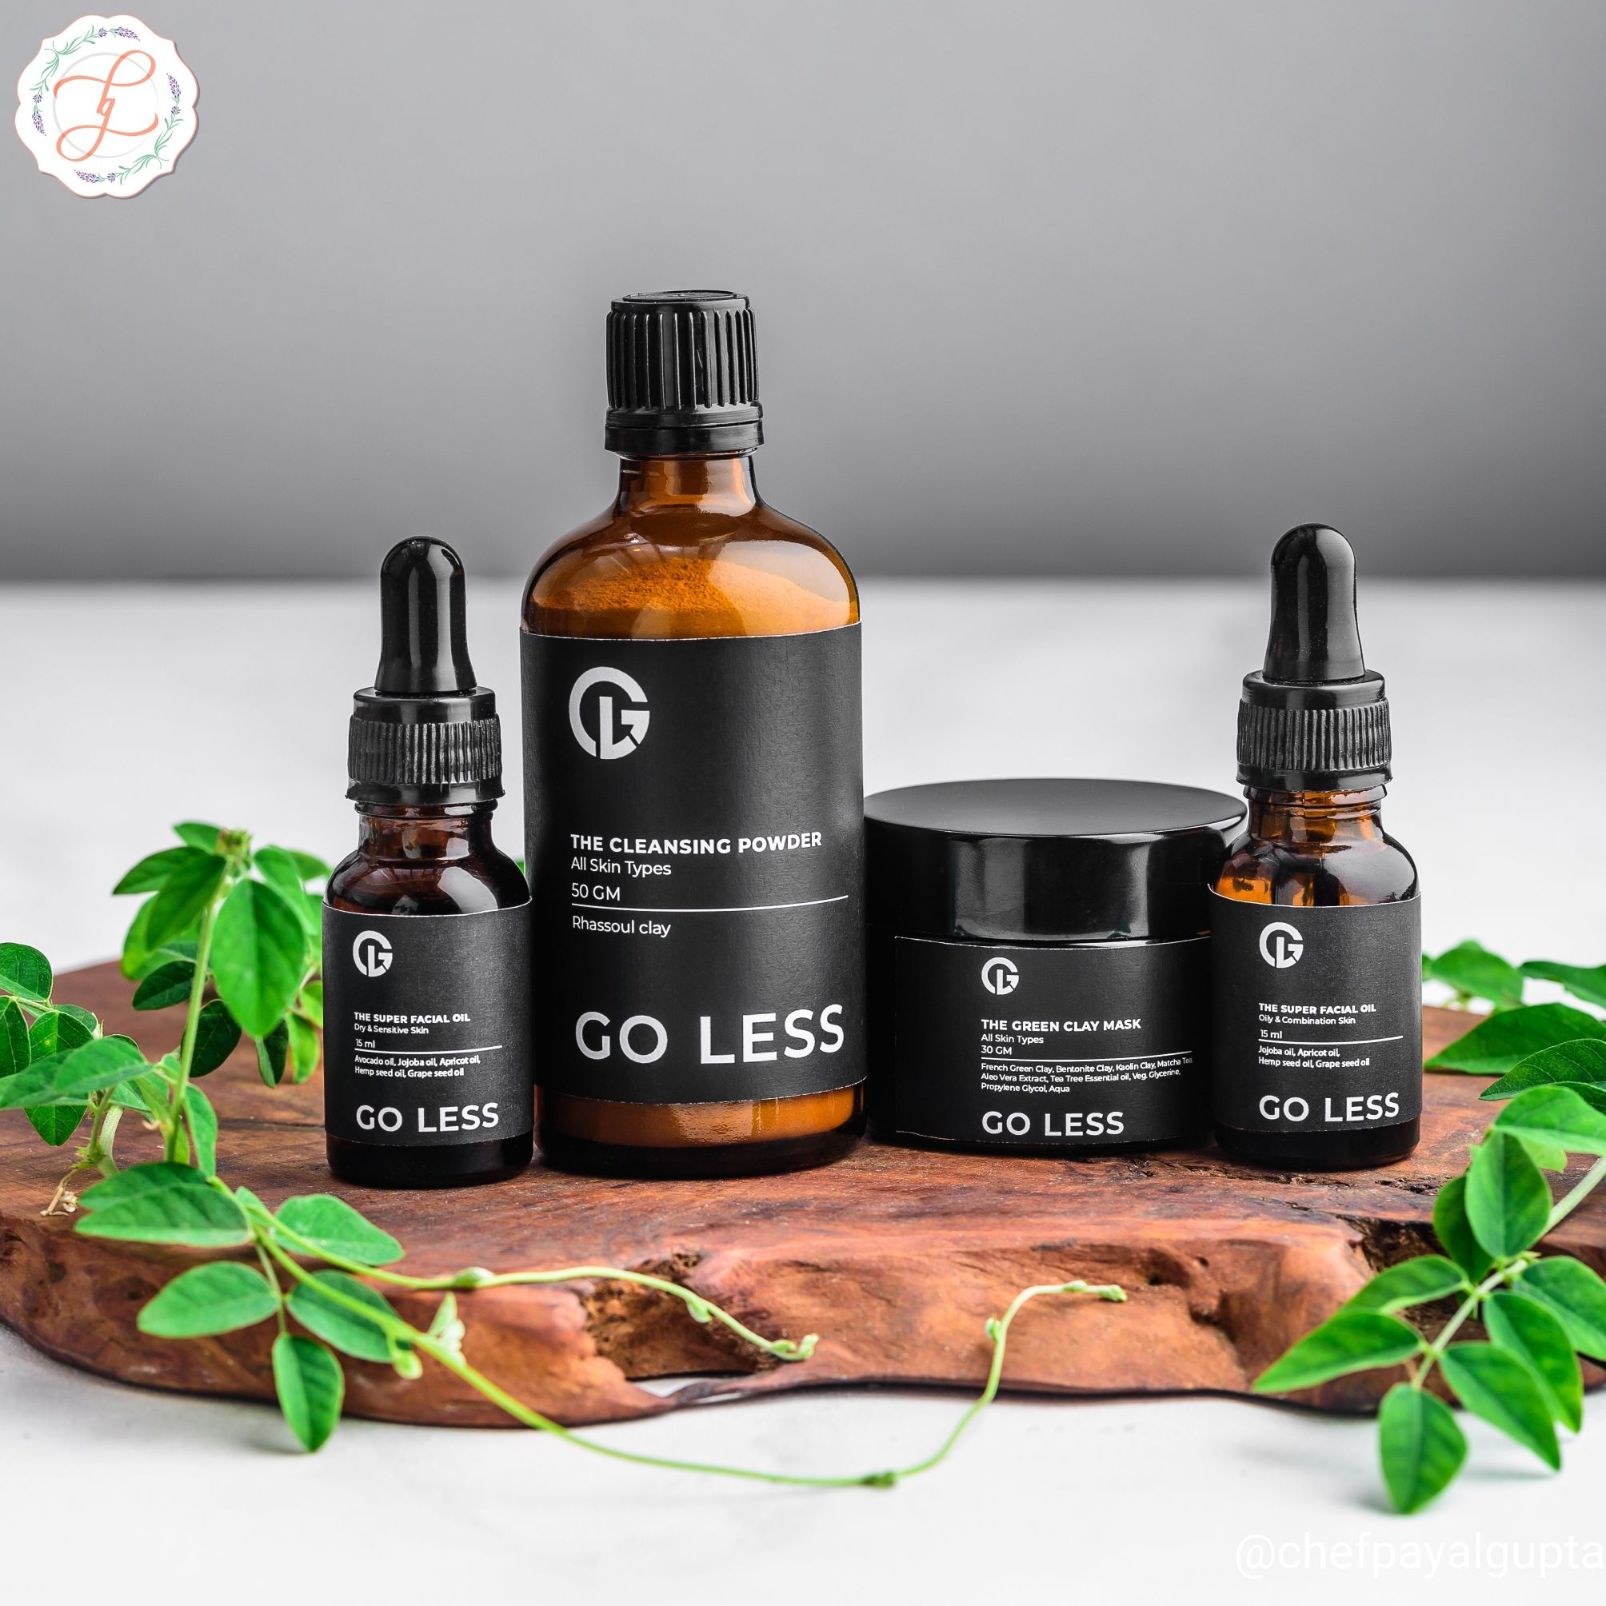 Food stylist for Product styling-Go less Product range